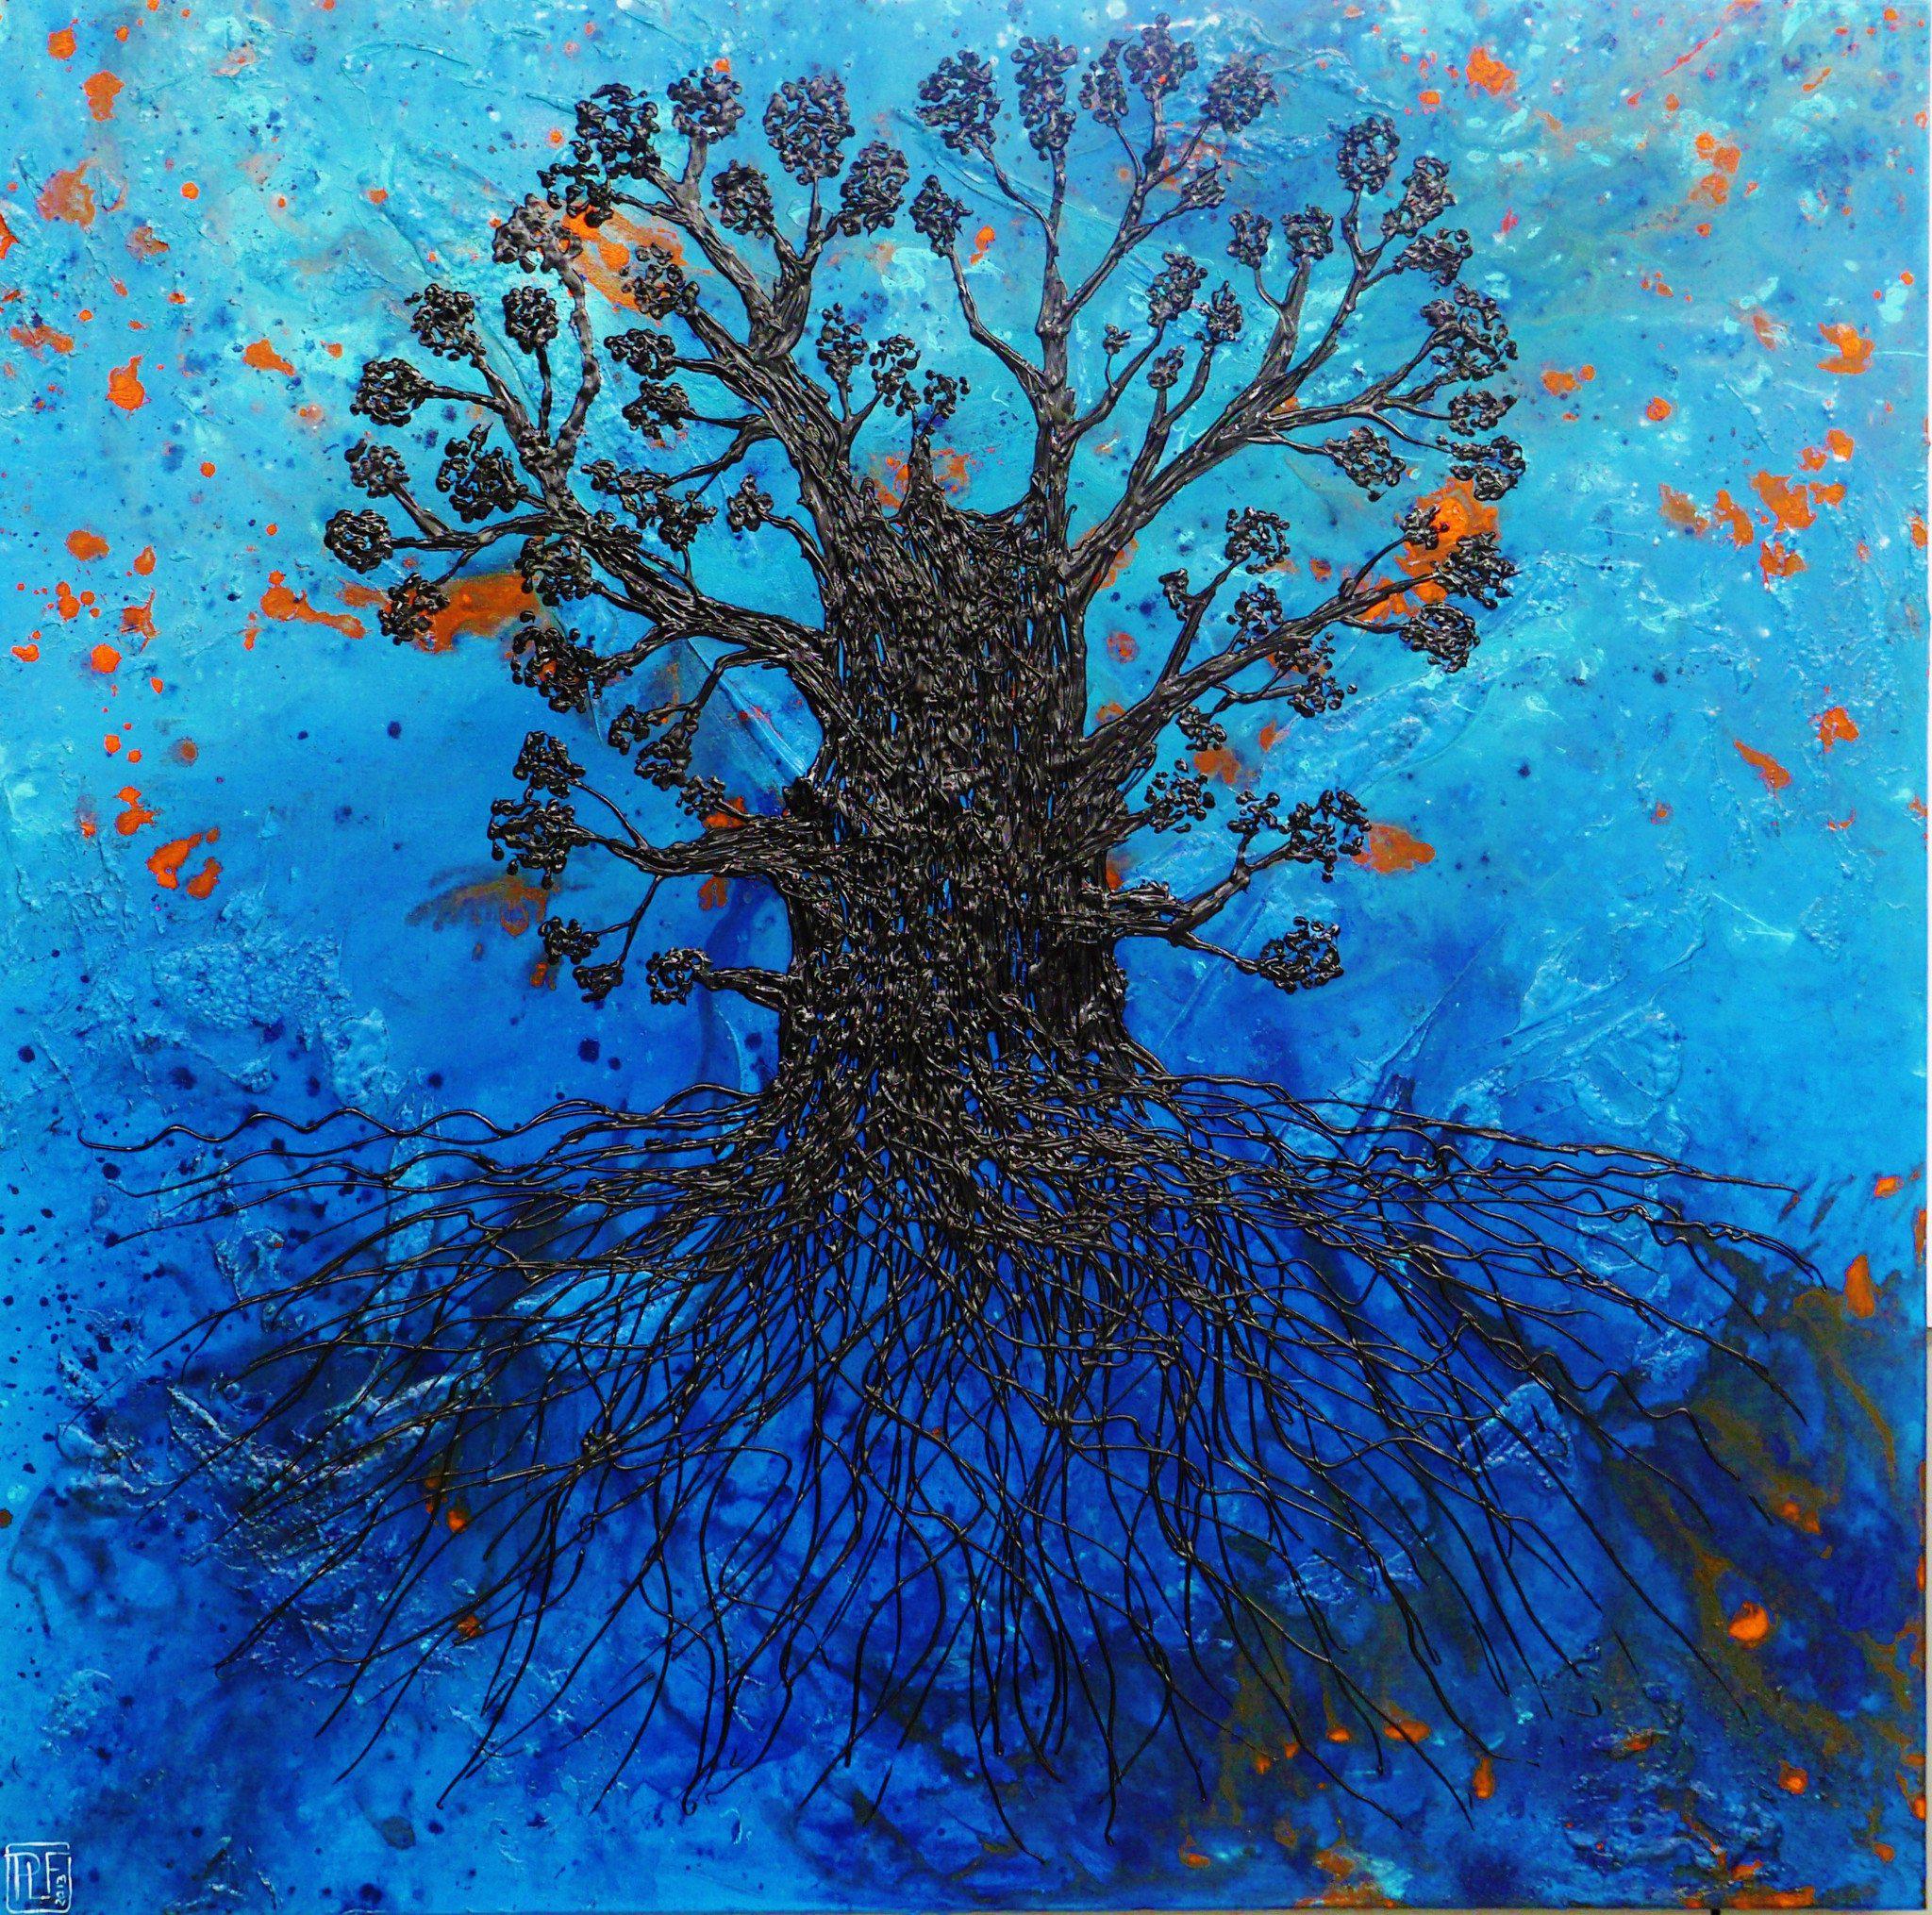 Be Inspired! Abstract Realism Blue Tree of Life (SOLD)-abstract realism-Franko-[Franko]-[Australia_Art]-[Art_Lovers_Australia]-Franklin Art Studio